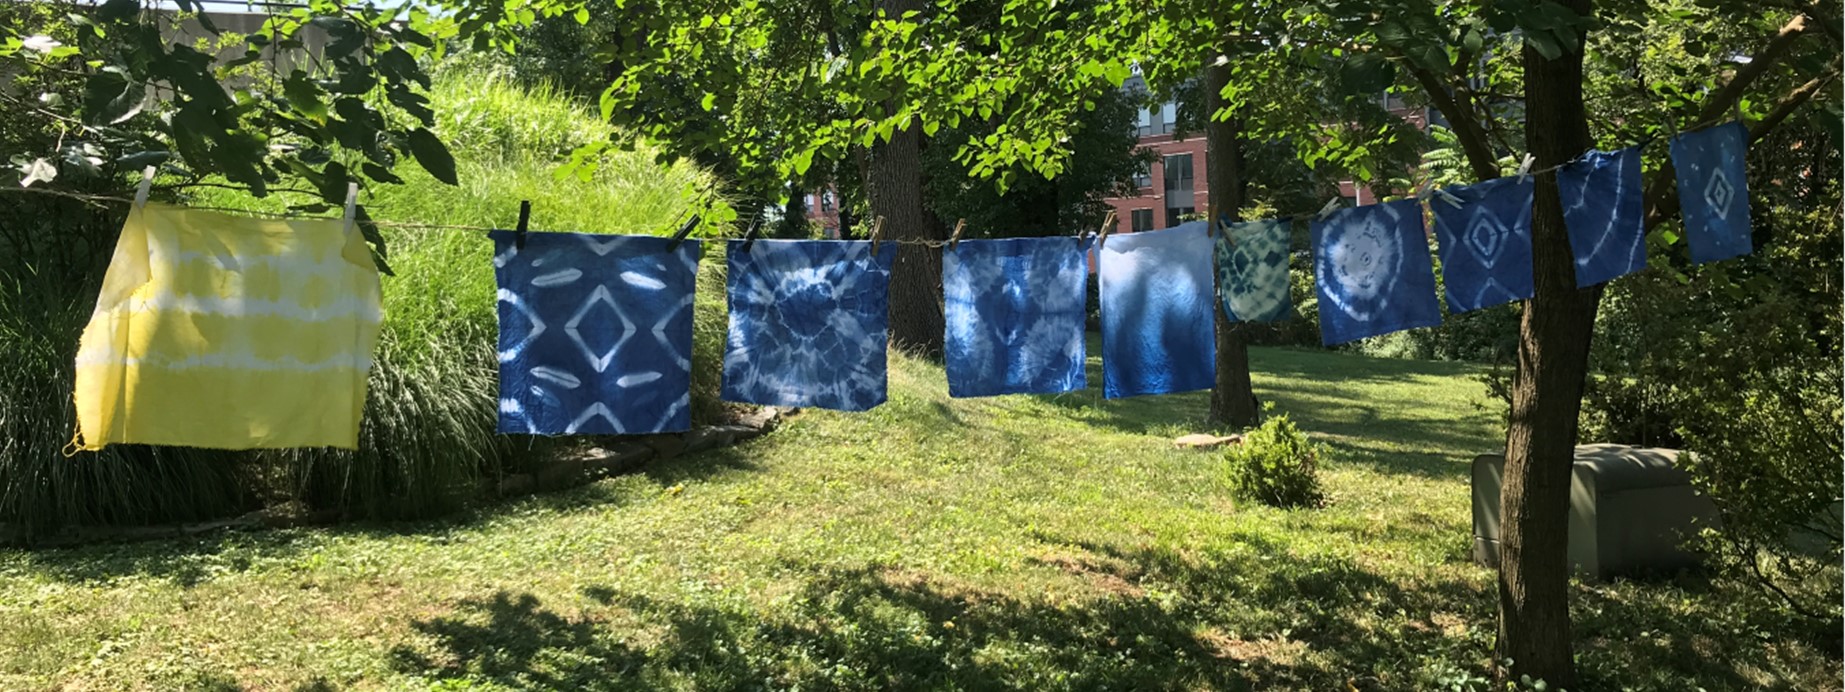 Fabric dyed with indigo and Black Eyed Susan's gorwn by the Baltimore Natural Dye Initiative Farmer Project.